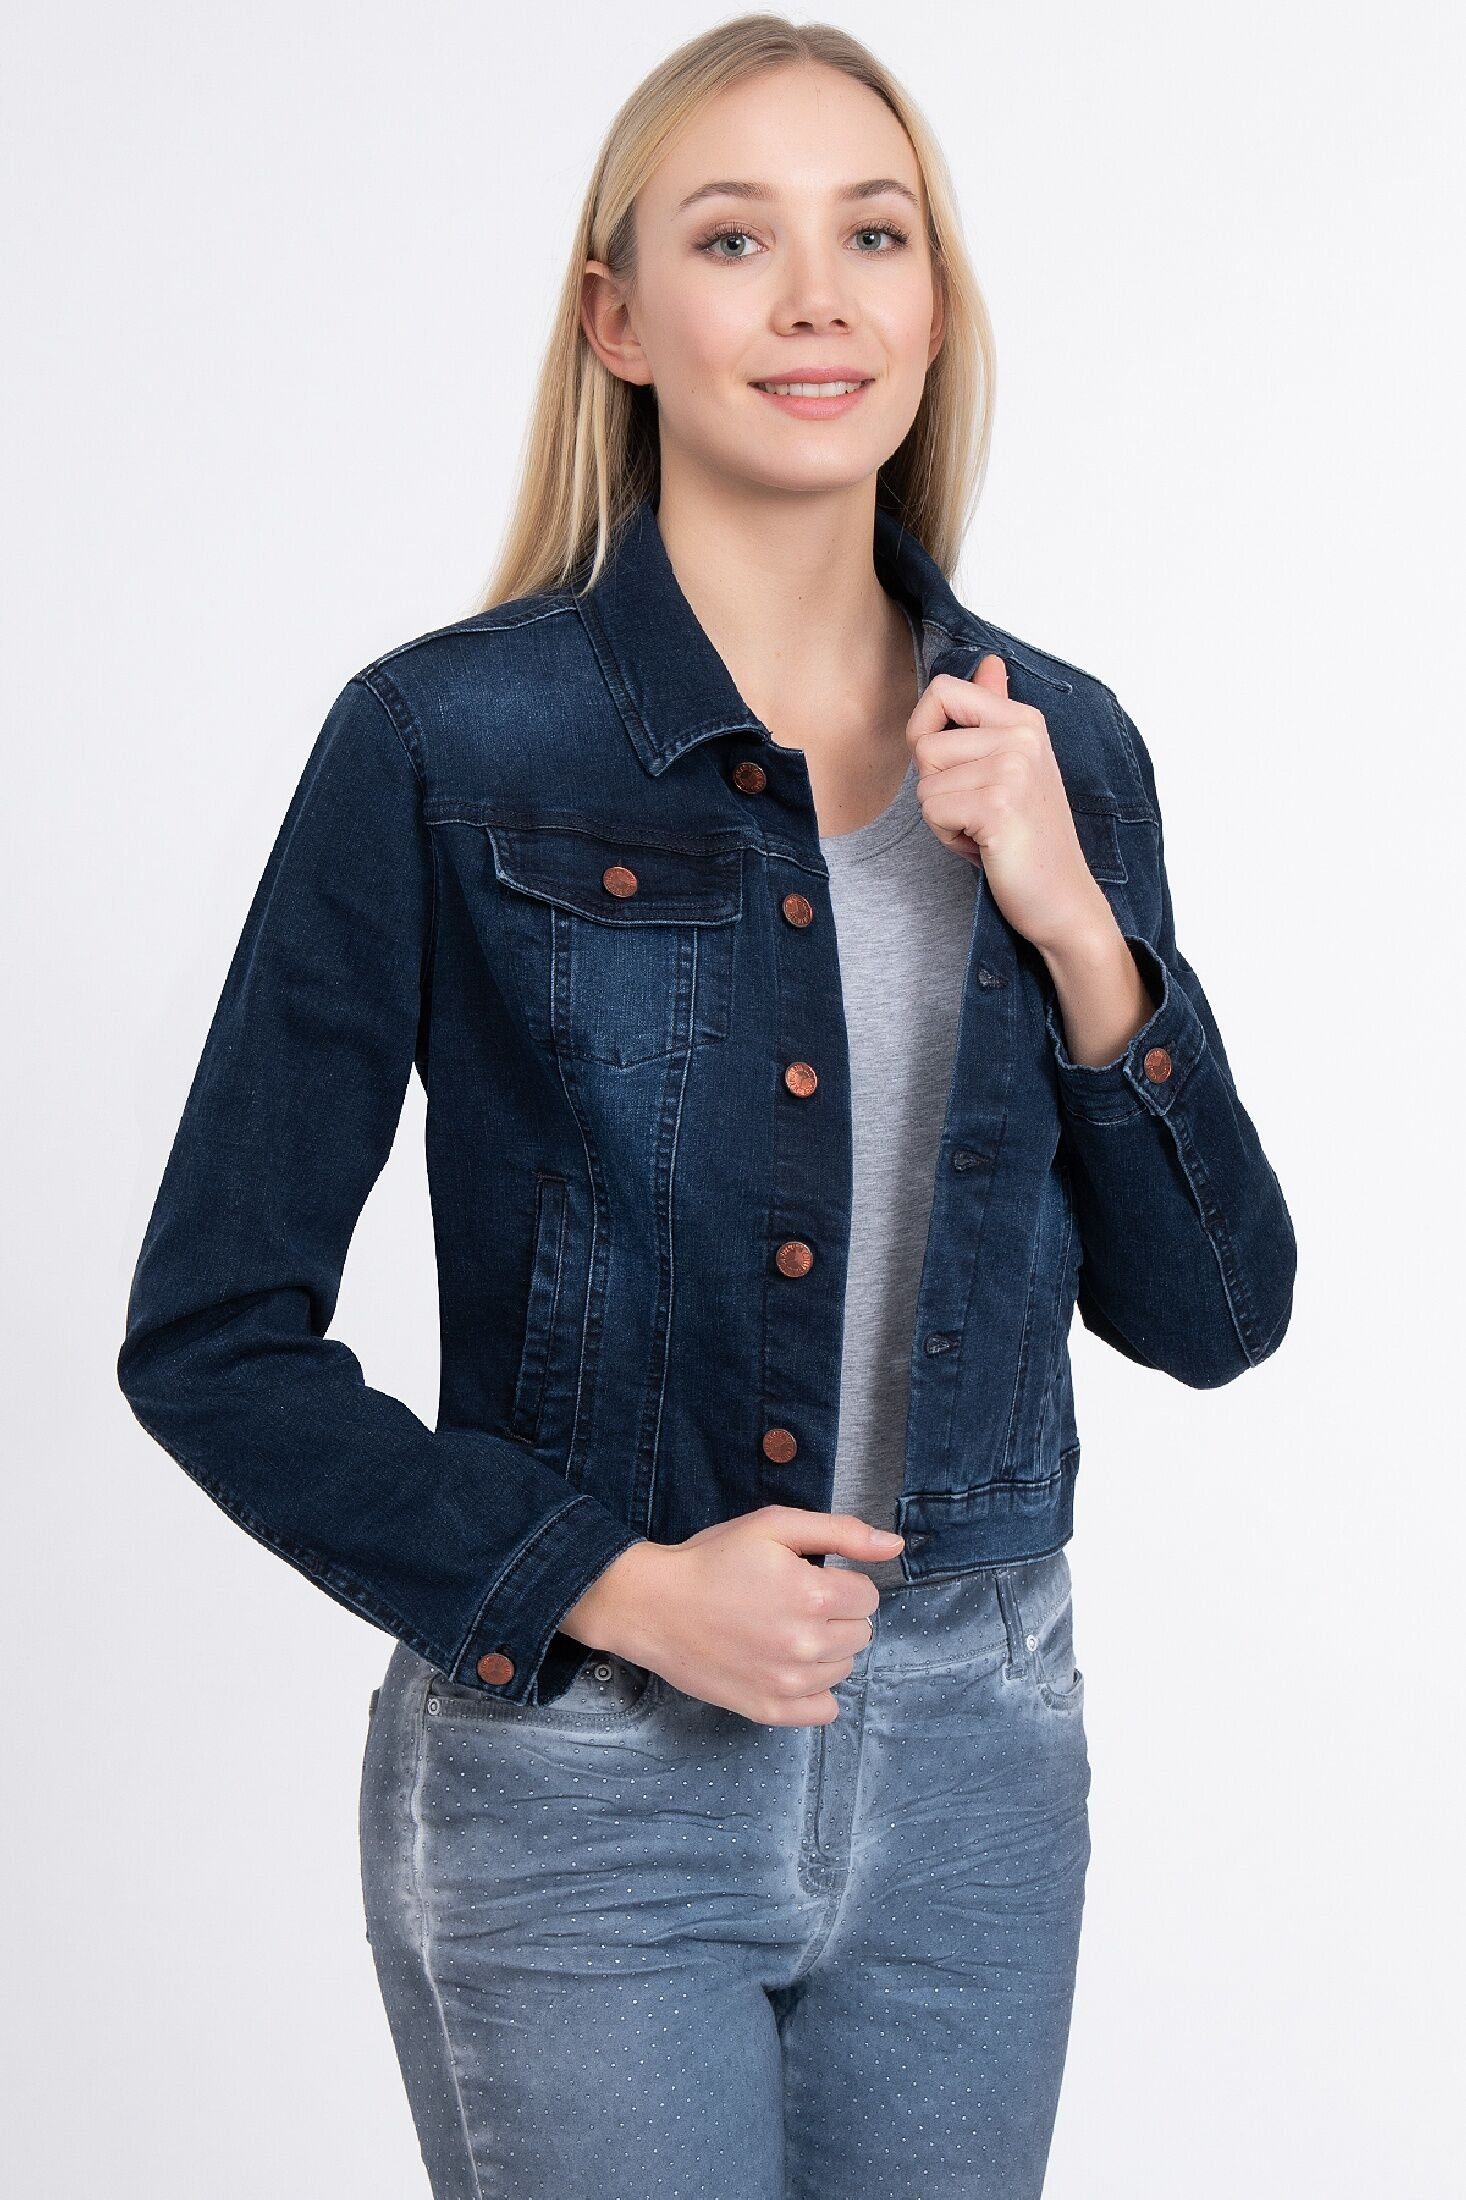 Jeansjacke nachhaltige Made Faire in Produktion Pants CHIC, Europe, und Recover